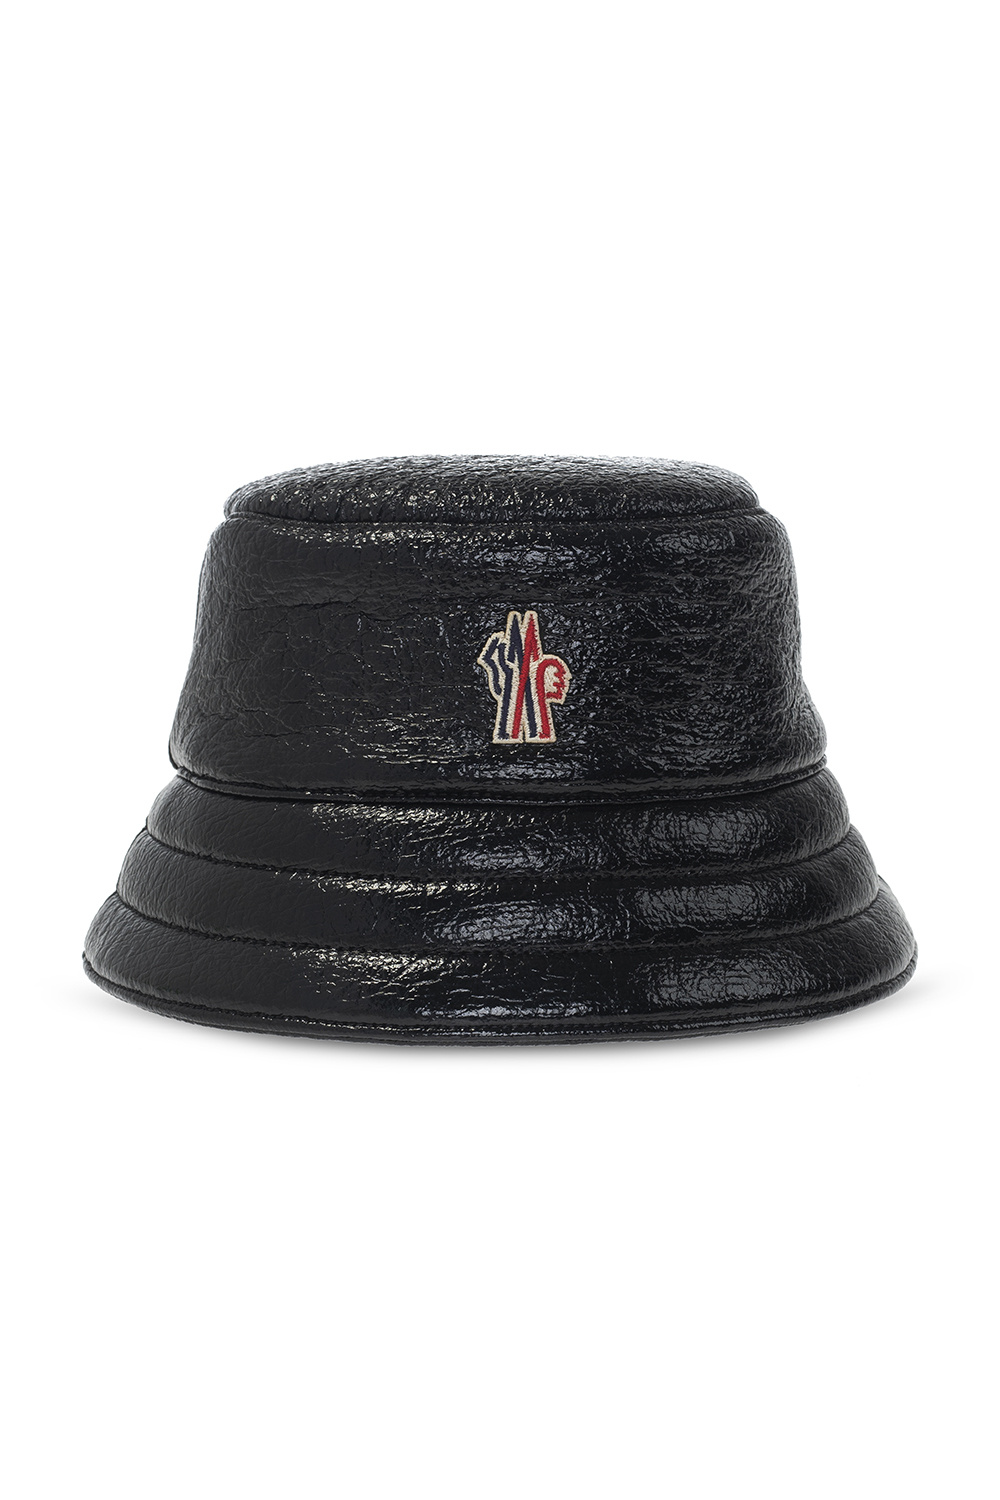 Moncler Grenoble Matching knot hat